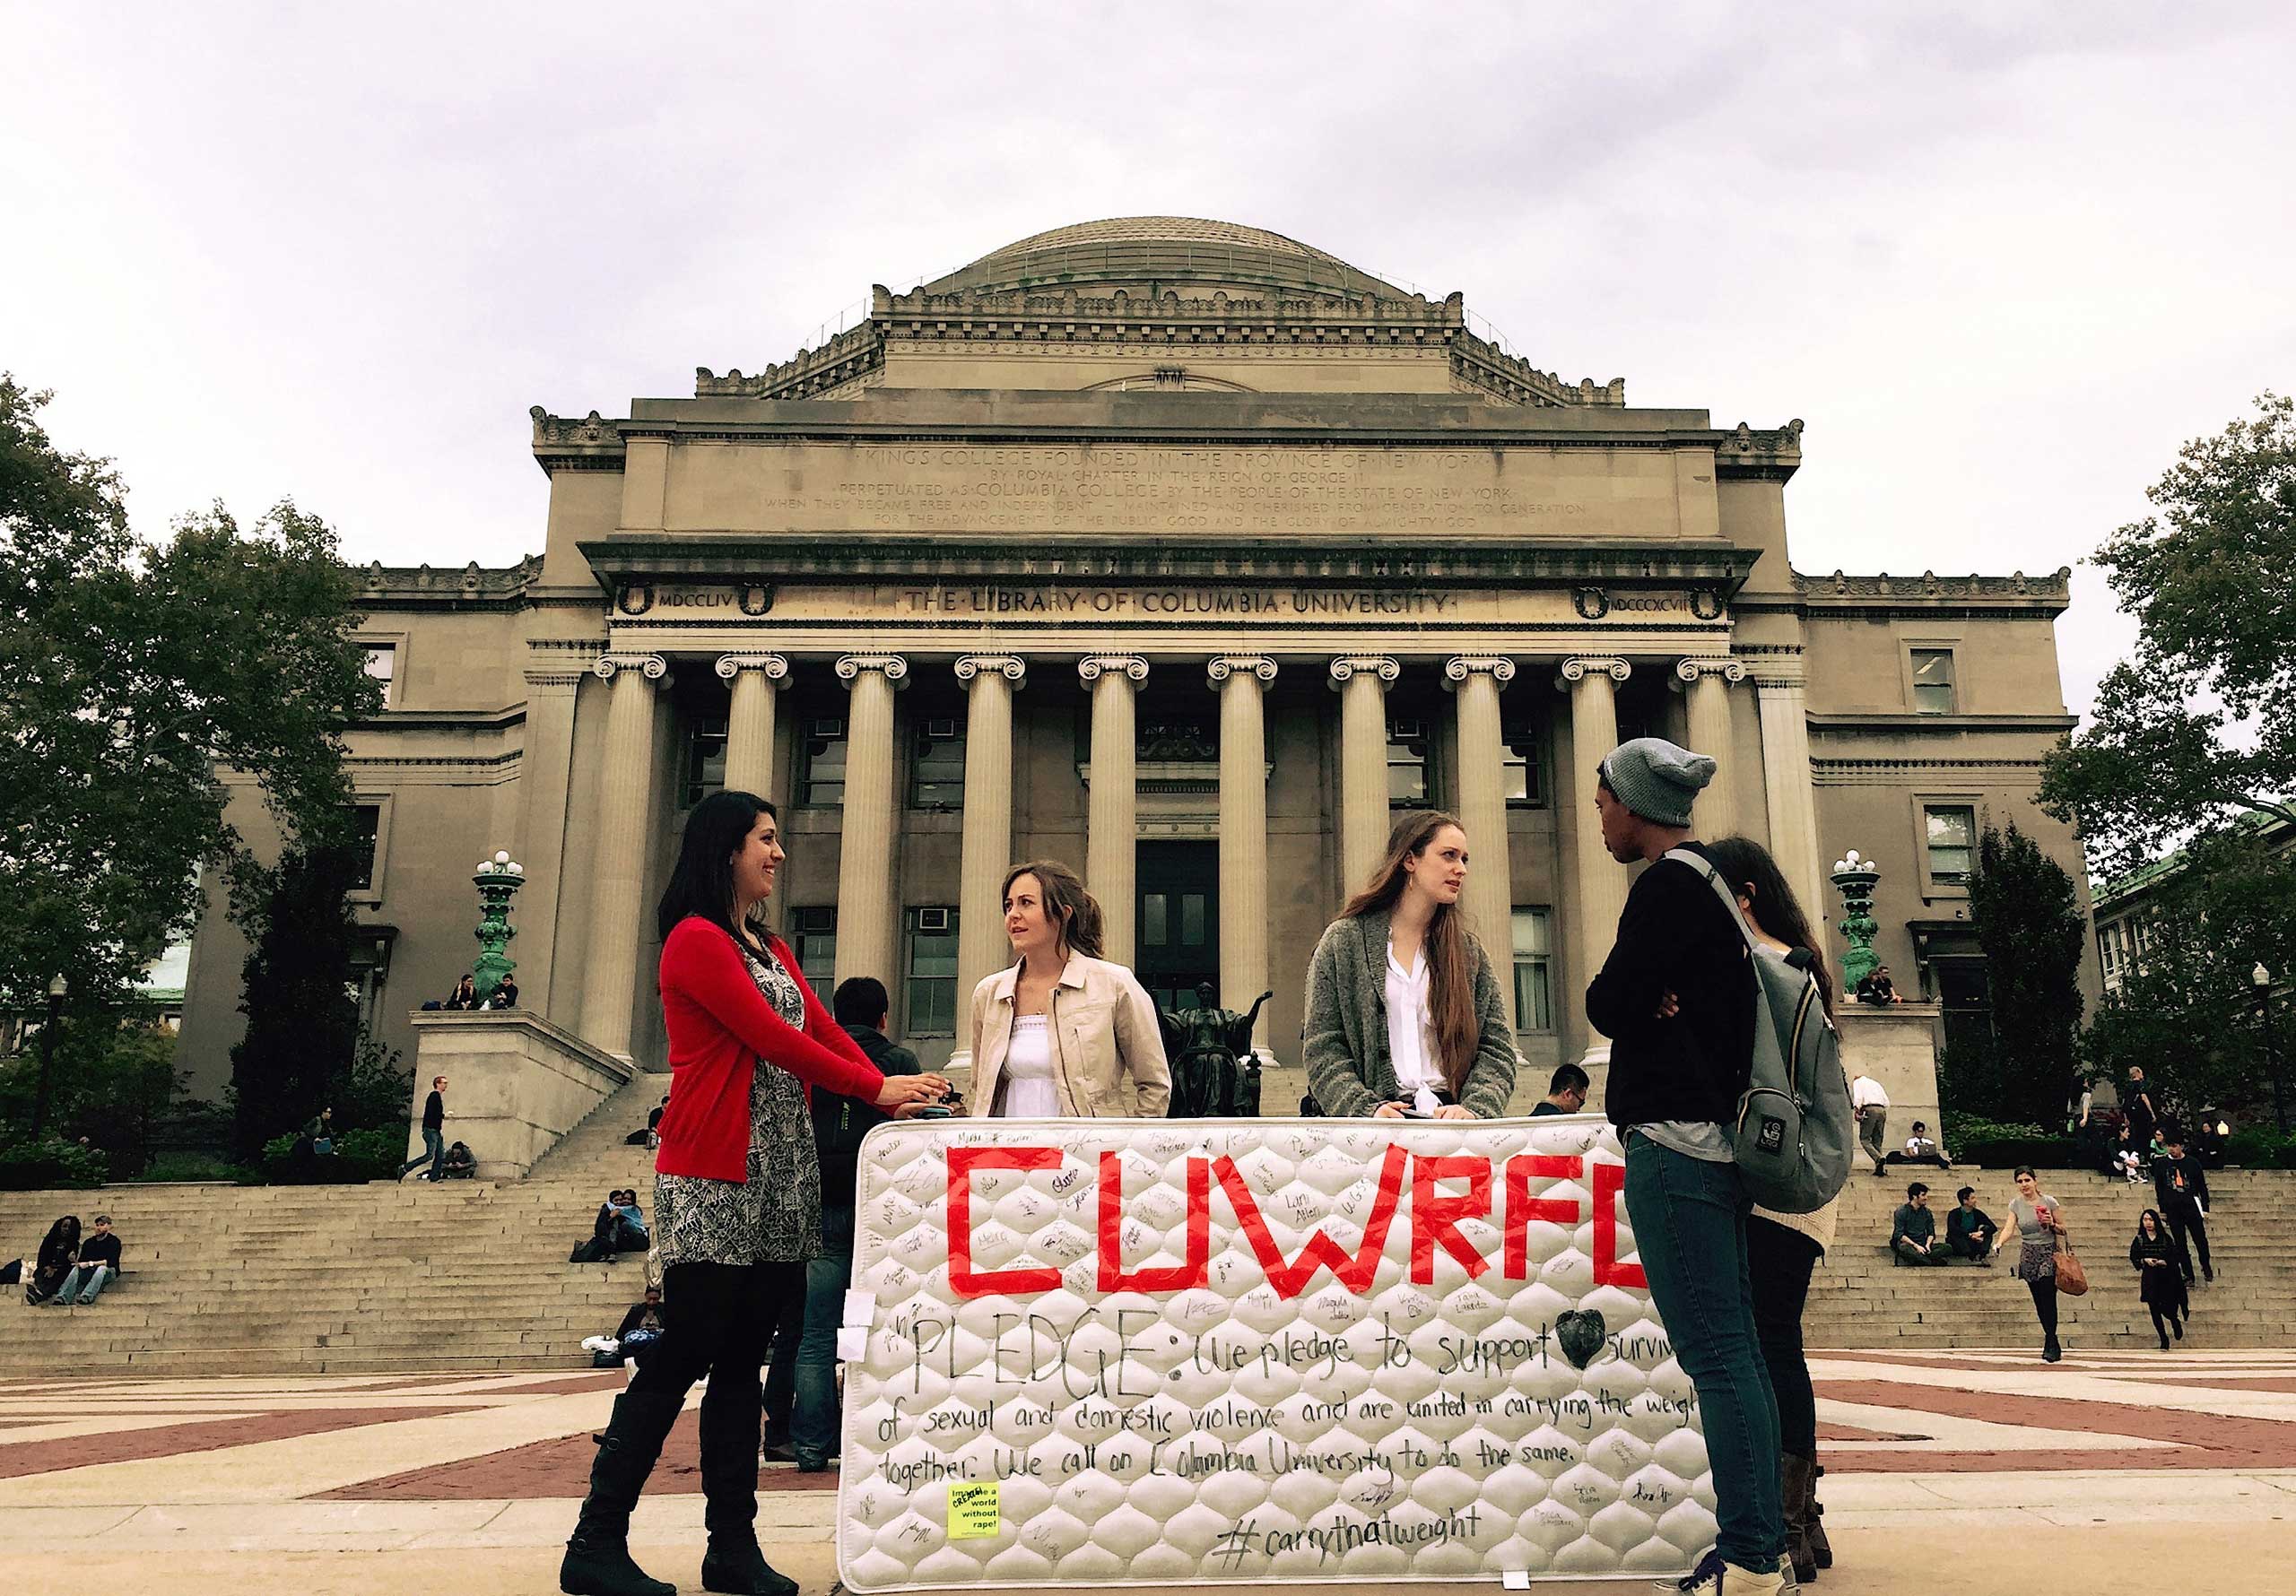 Student protesters stand in front of the Library of Columbia University, New York, Oct. 29, 2014. (Selcuk Acar—Anadolu Agency/Getty Images)